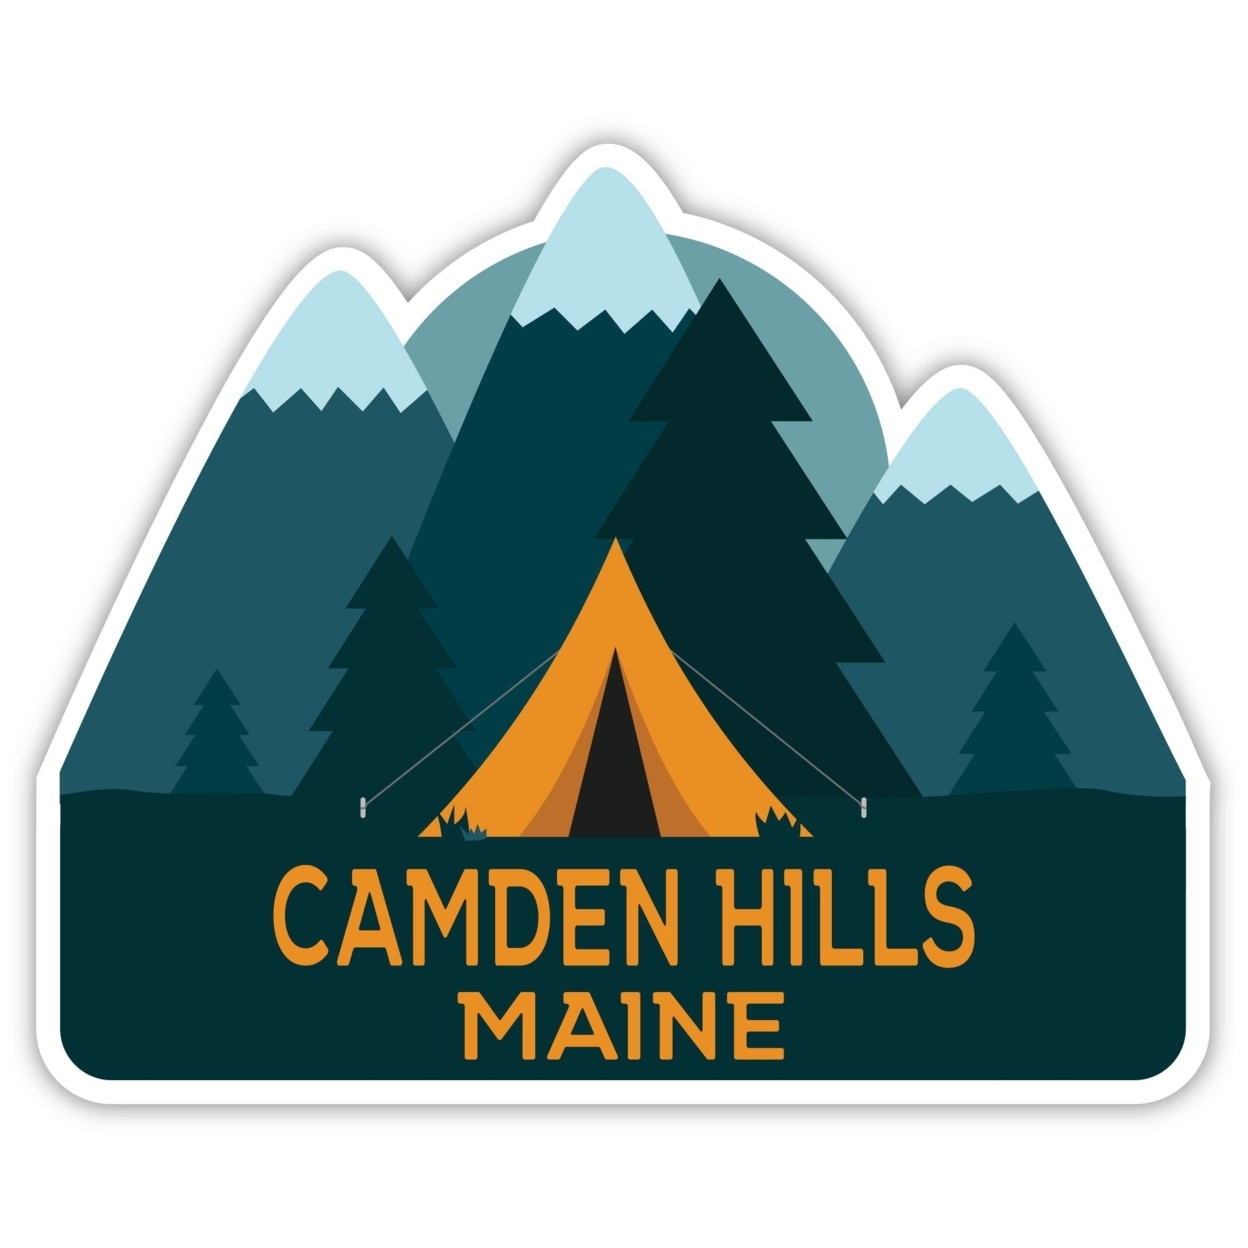 Camden Hills Maine Souvenir Decorative Stickers (Choose Theme And Size) - 4-Pack, 2-Inch, Tent